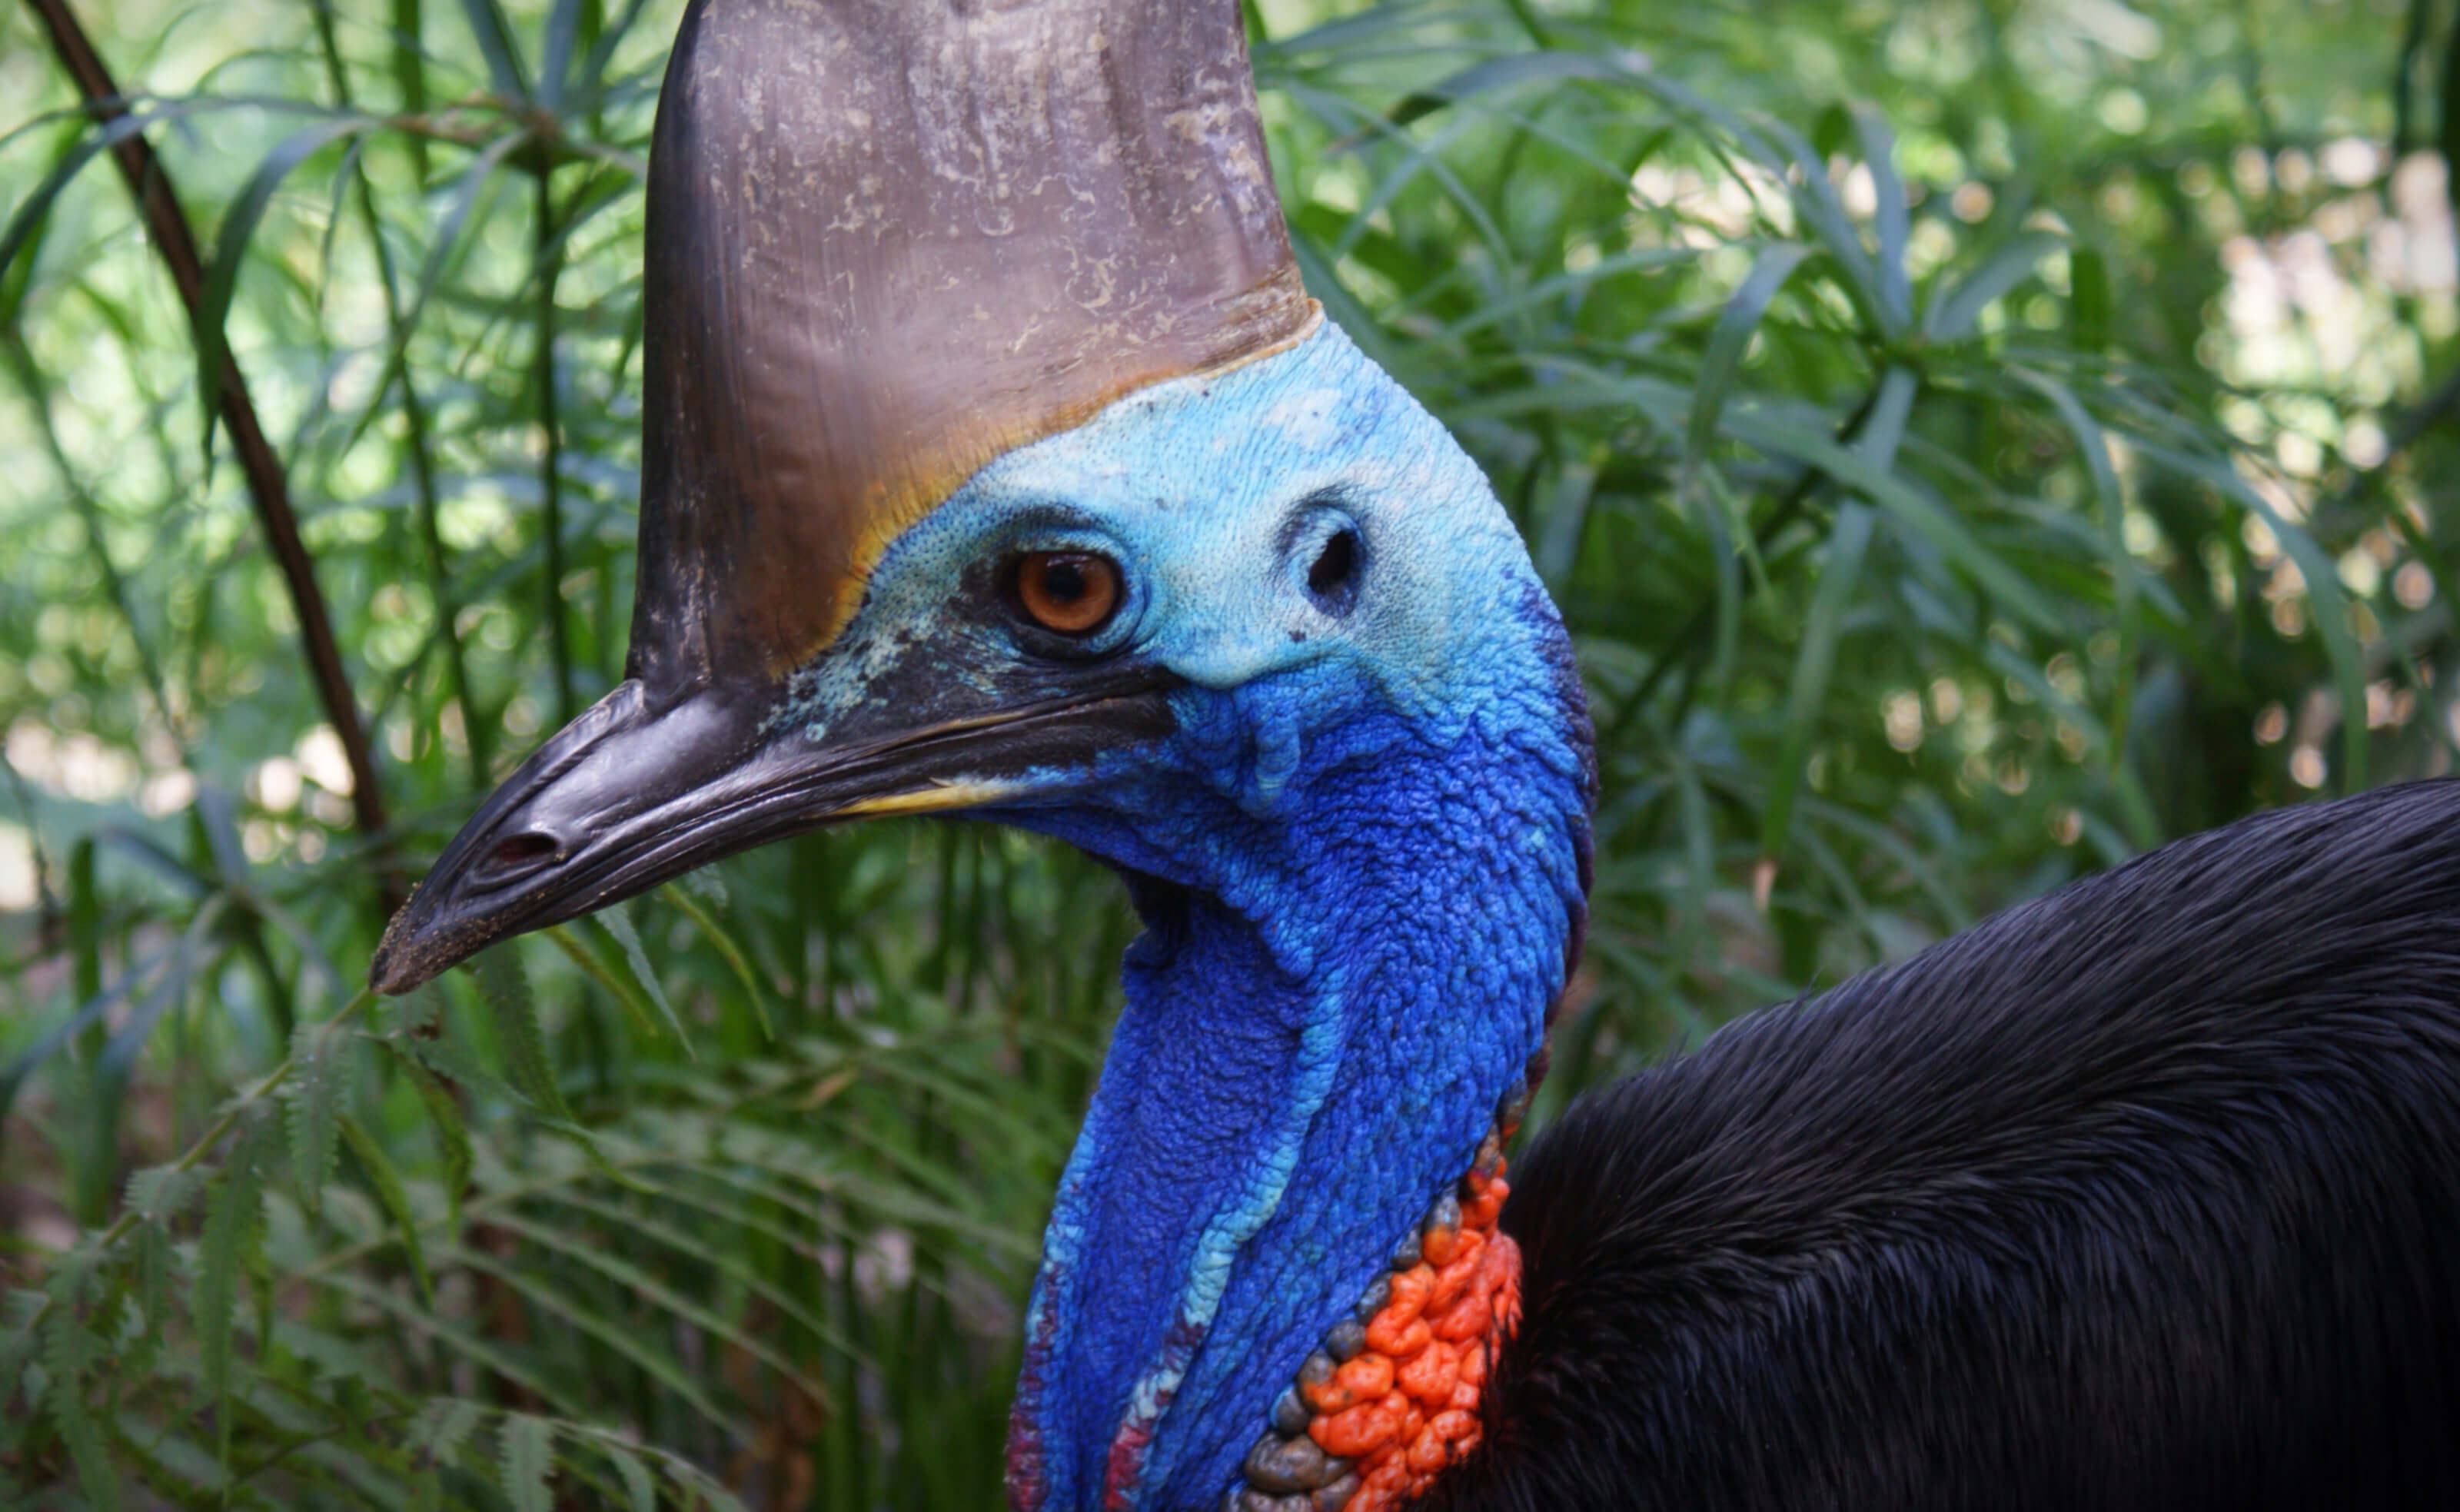 Southern cassowary in rainforest